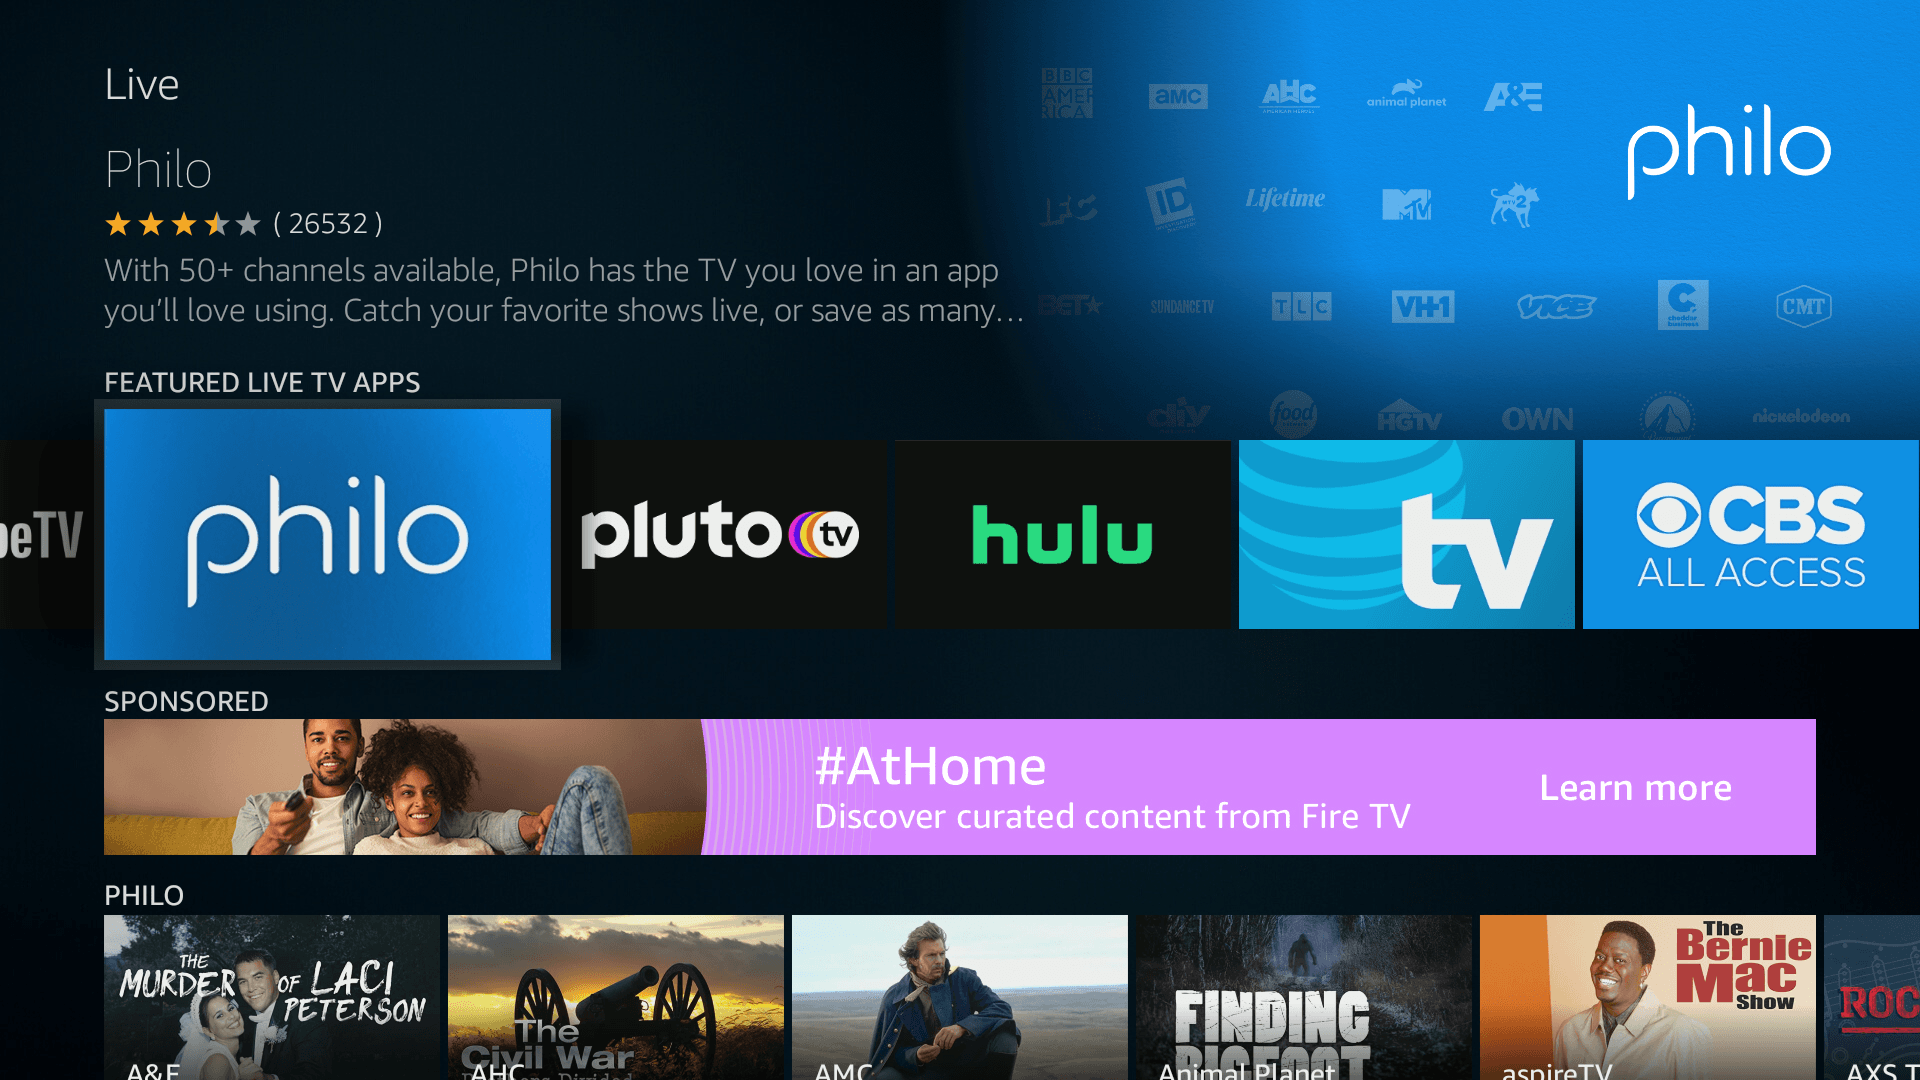 Philo Adds TV One to Its Channel Lineup